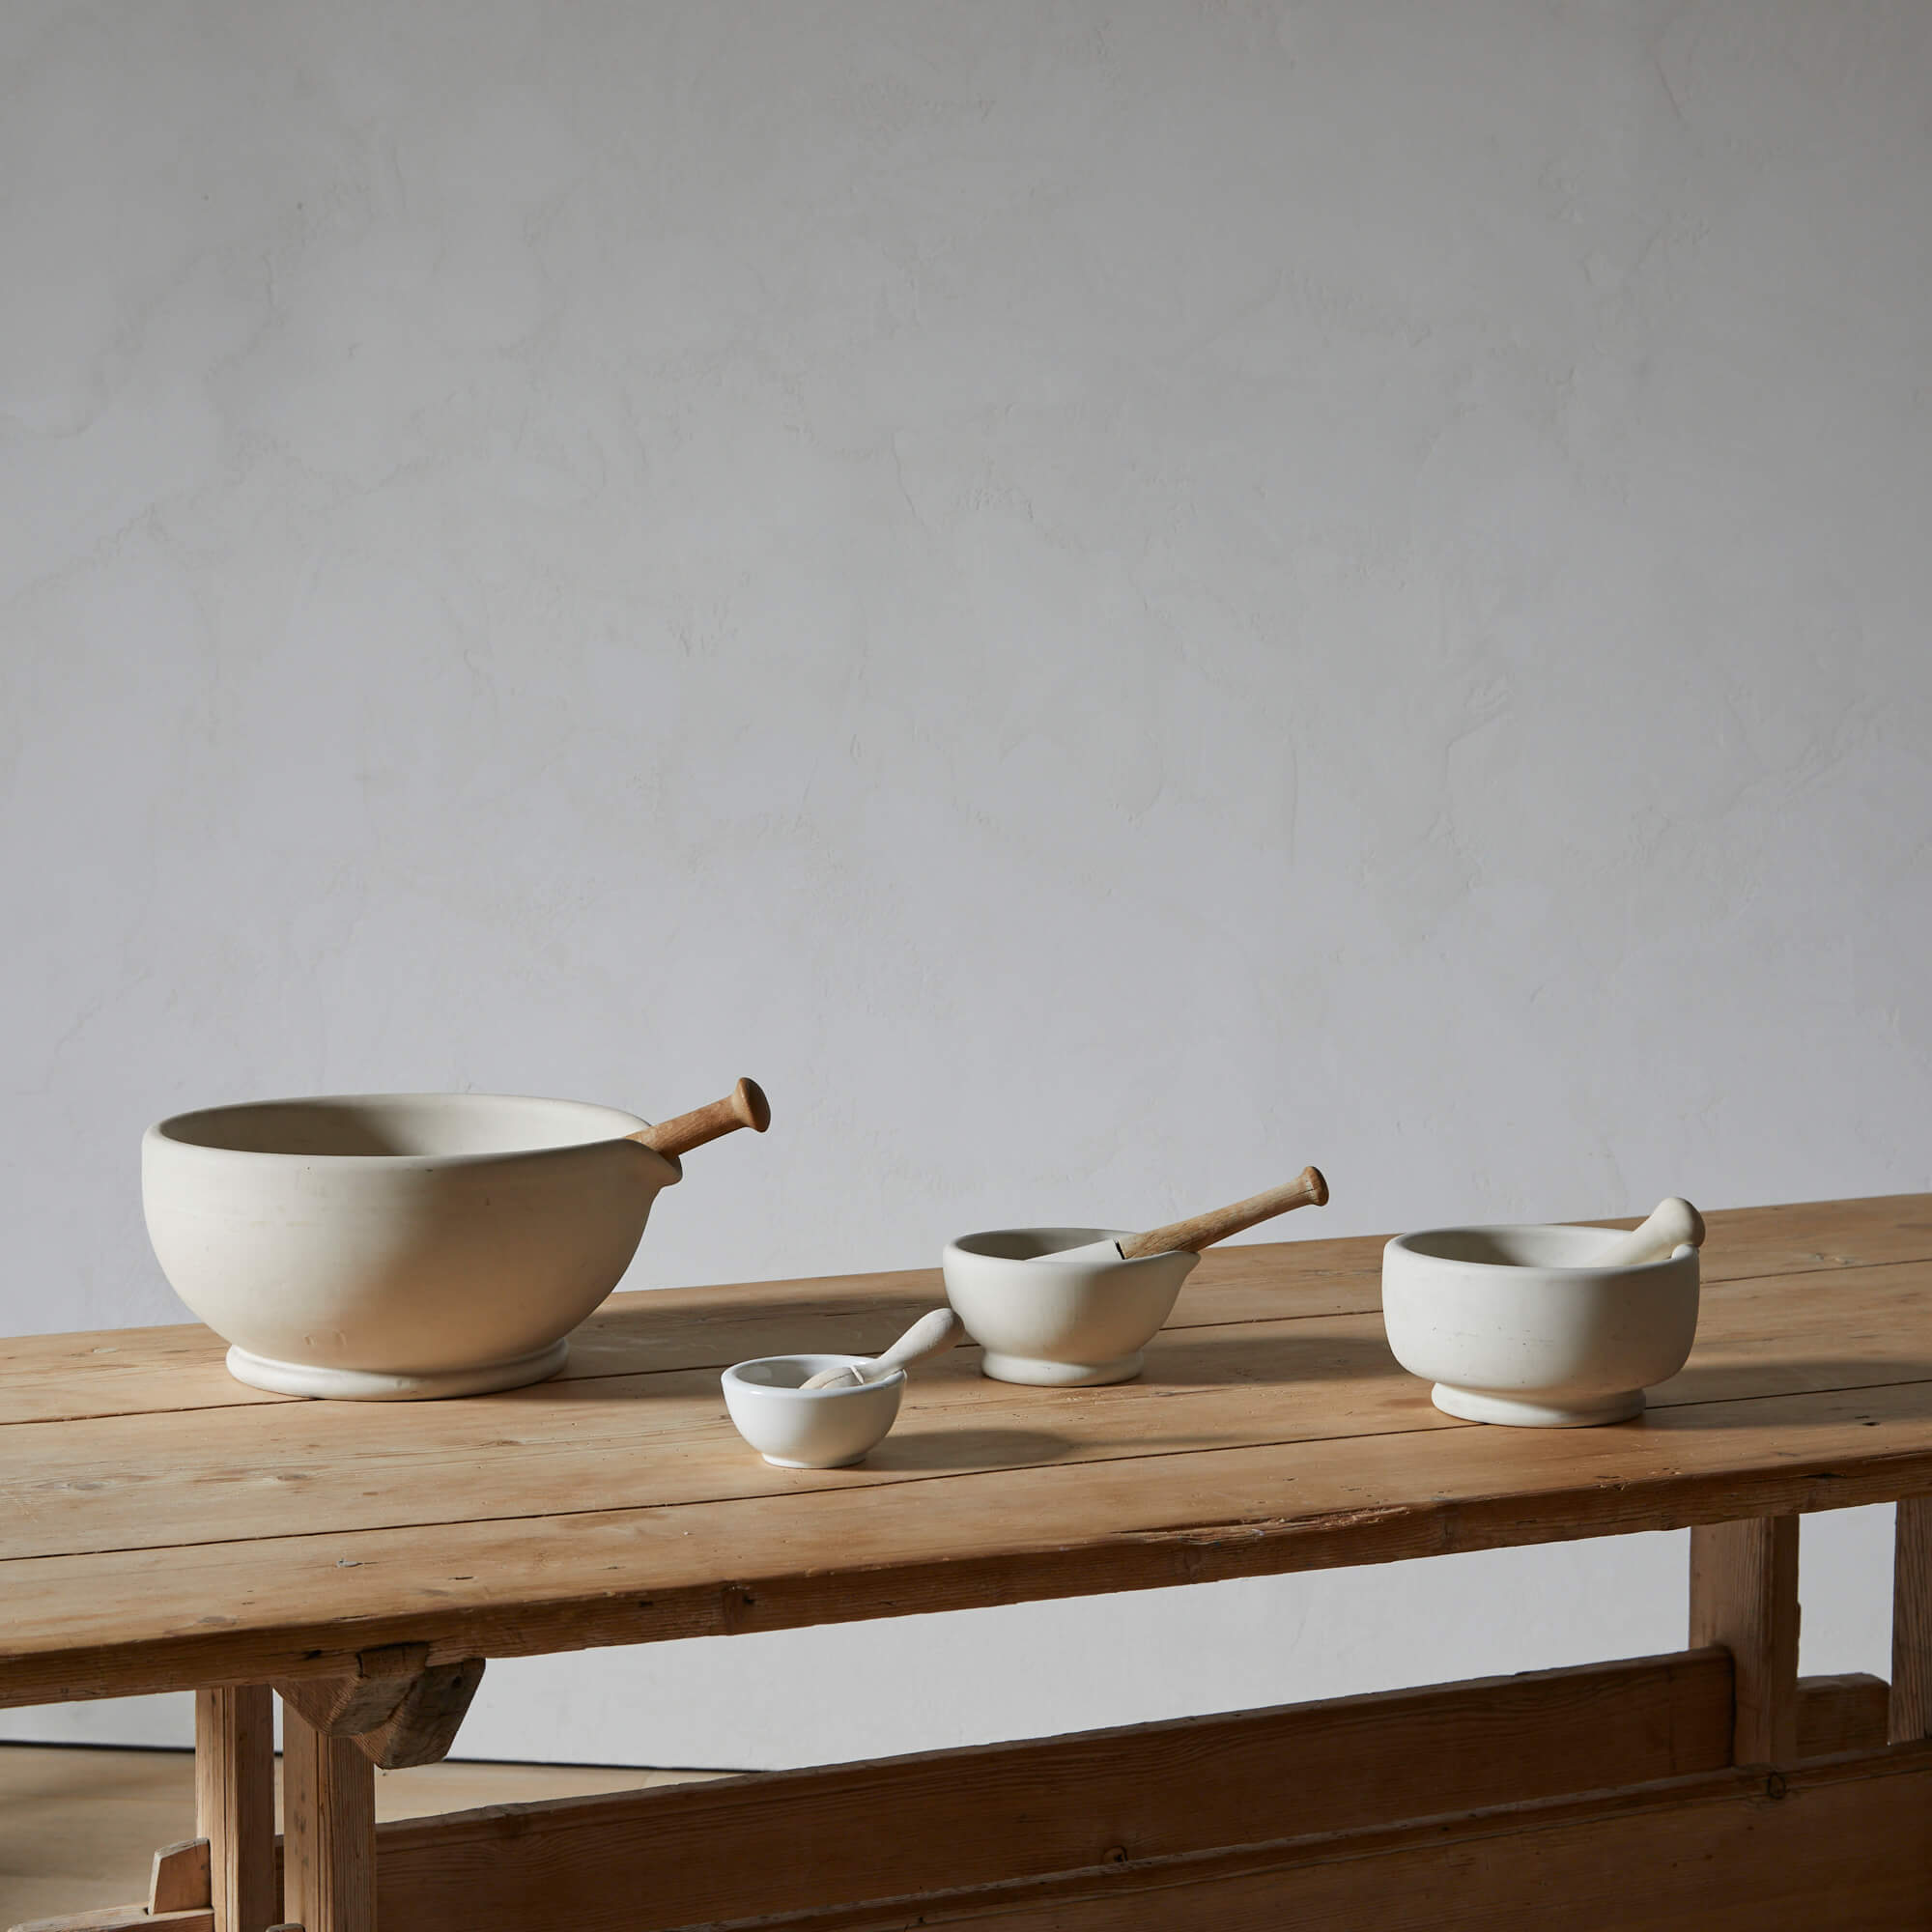 Apothecary Mortars from the collection of Sir Terence Conran